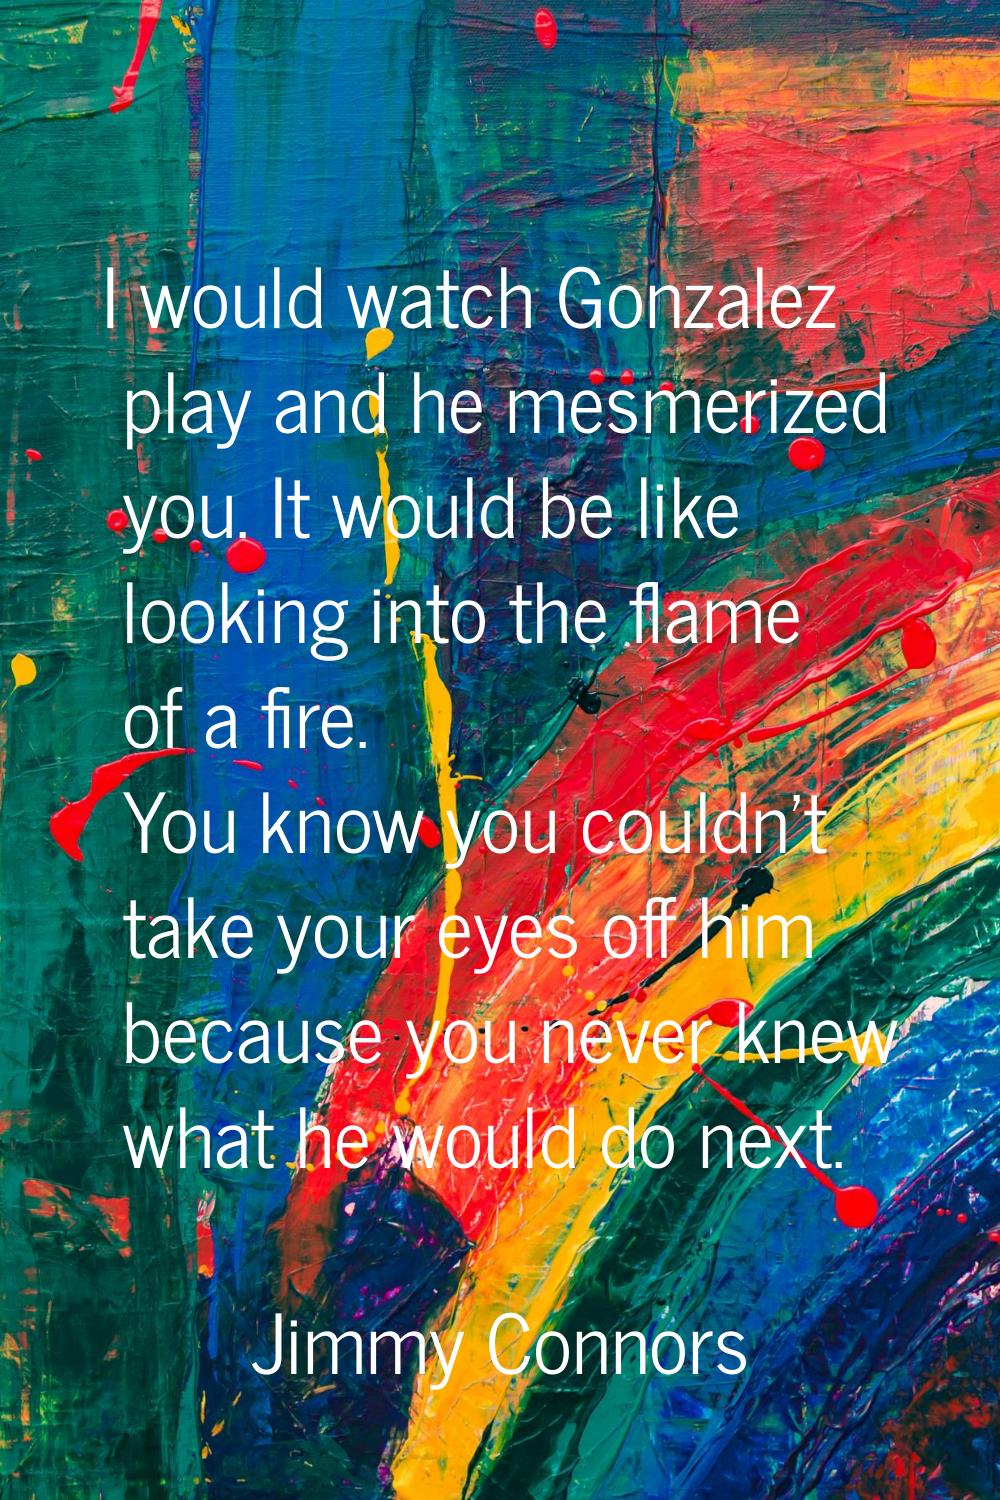 I would watch Gonzalez play and he mesmerized you. It would be like looking into the flame of a fir